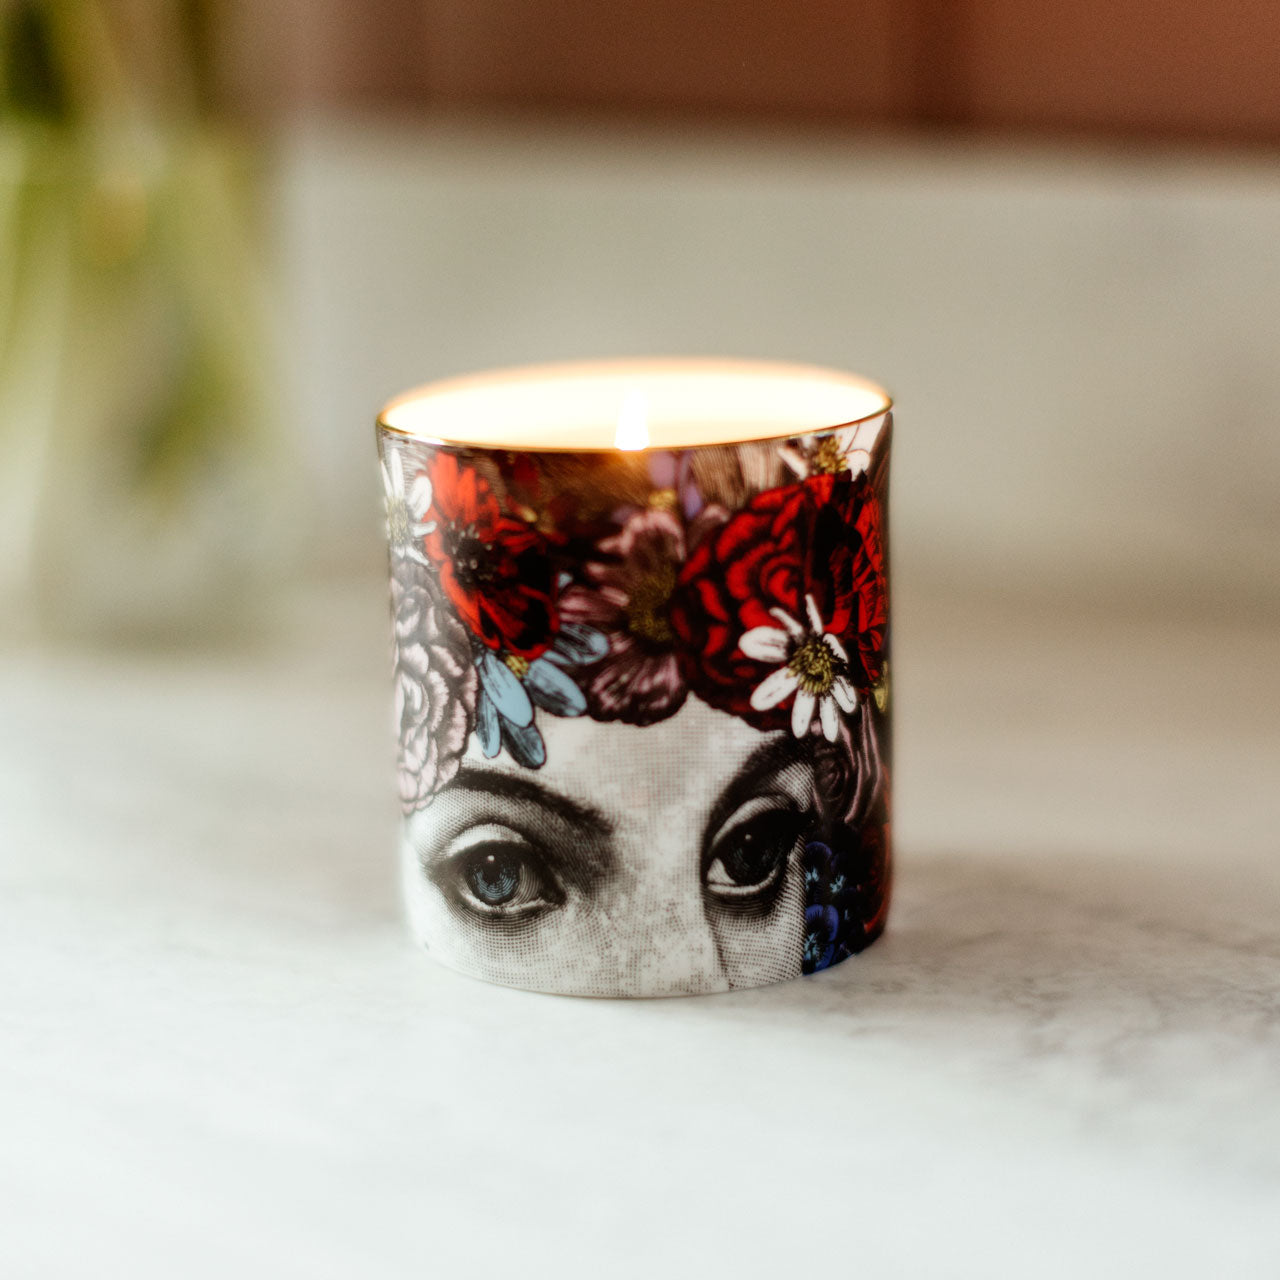 The Flower Lady Ceramic Candle ✨Special Edition✨